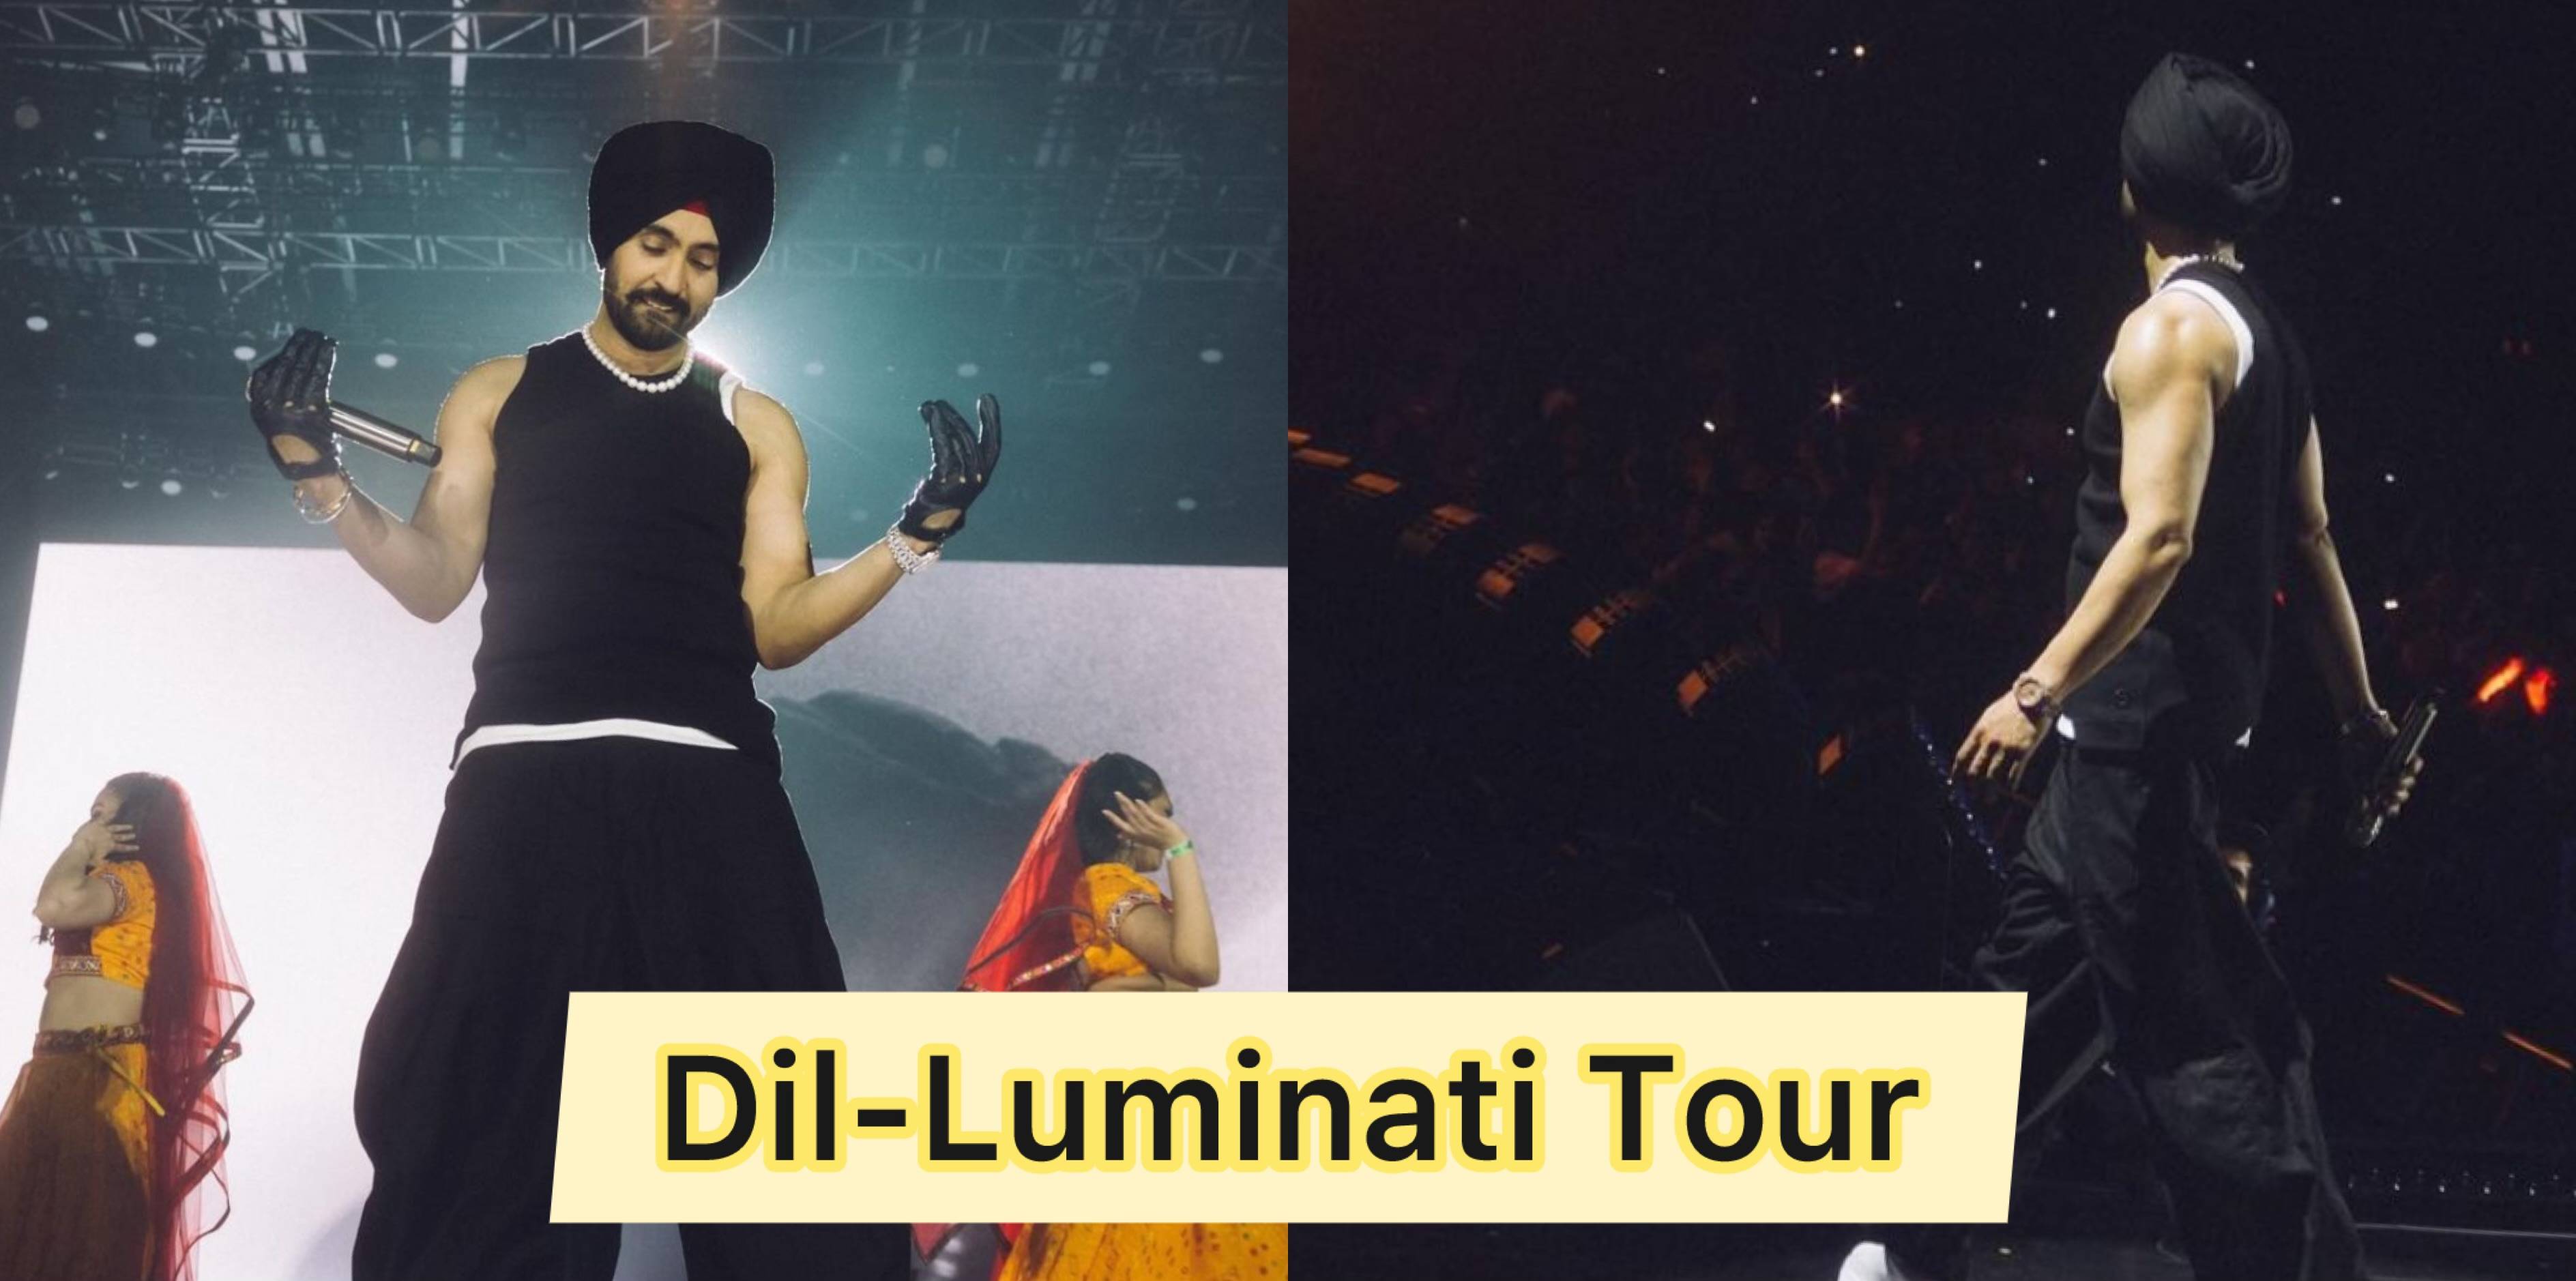 Diljit Dosanjh Again Creates History With His Dil-luminati Tour in Vancouver